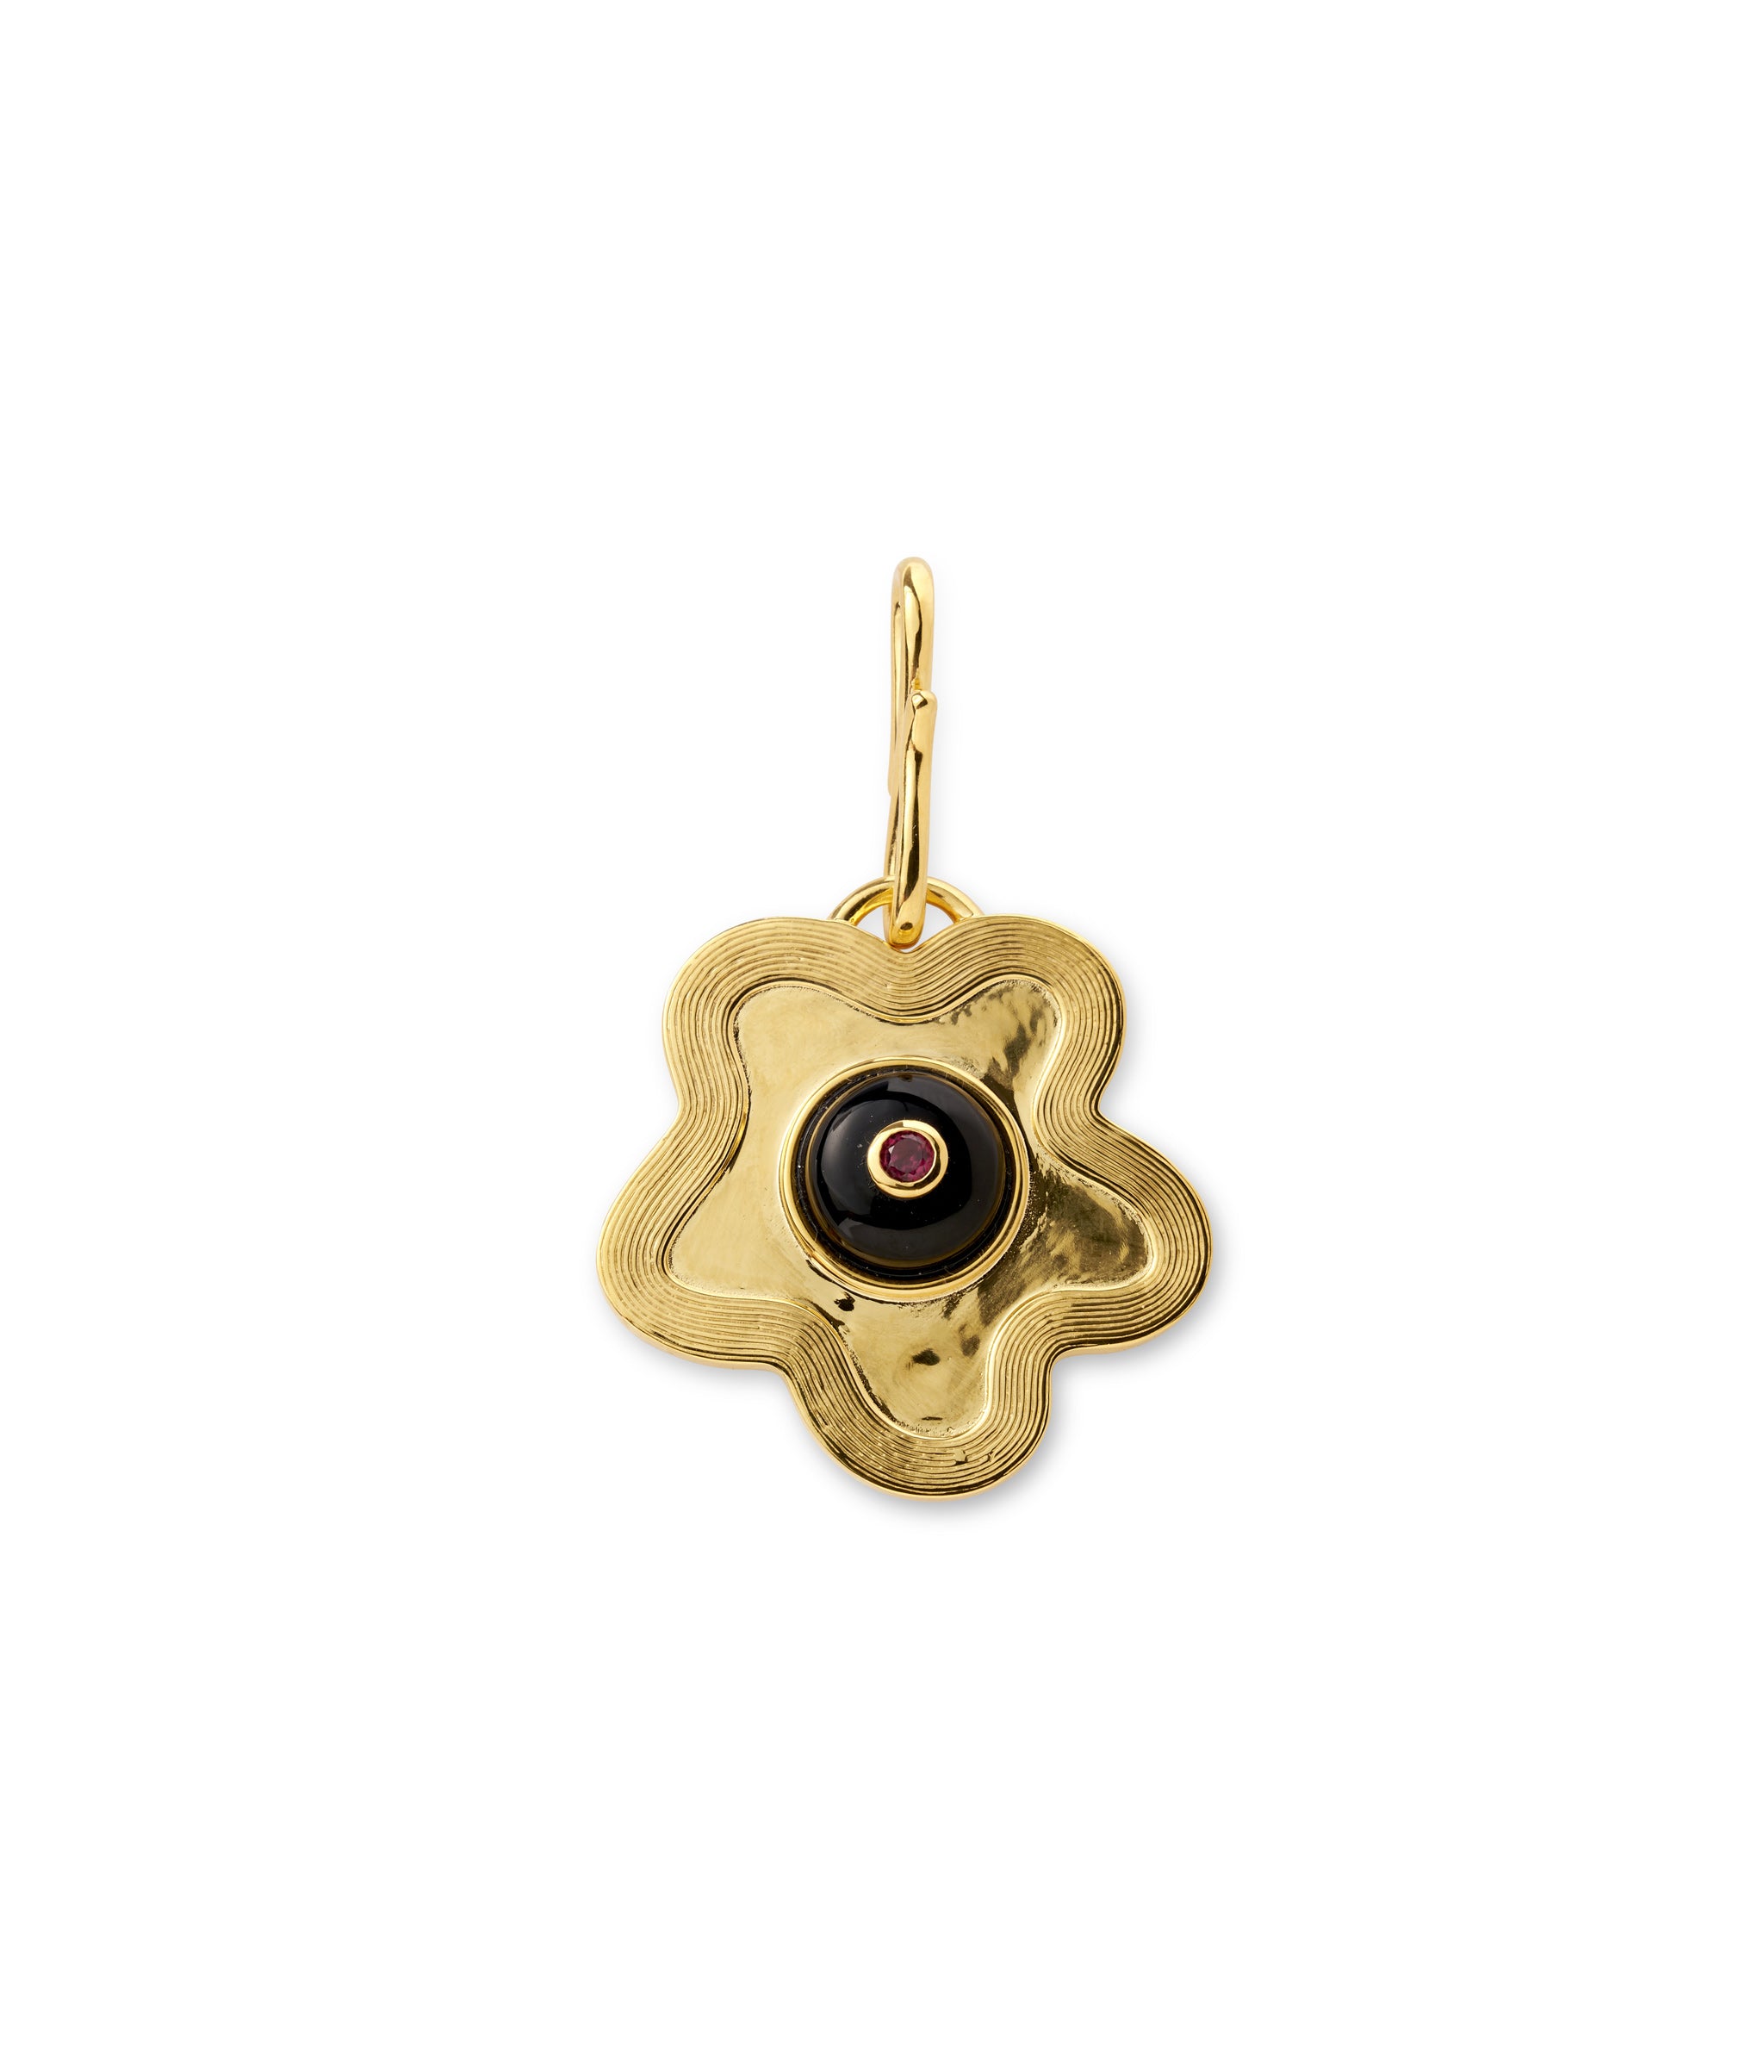 Nana Pendant in Black Daisy. Gold-plated brass etched daisy with onyx cabochon, inlaid with pink rhodolite.